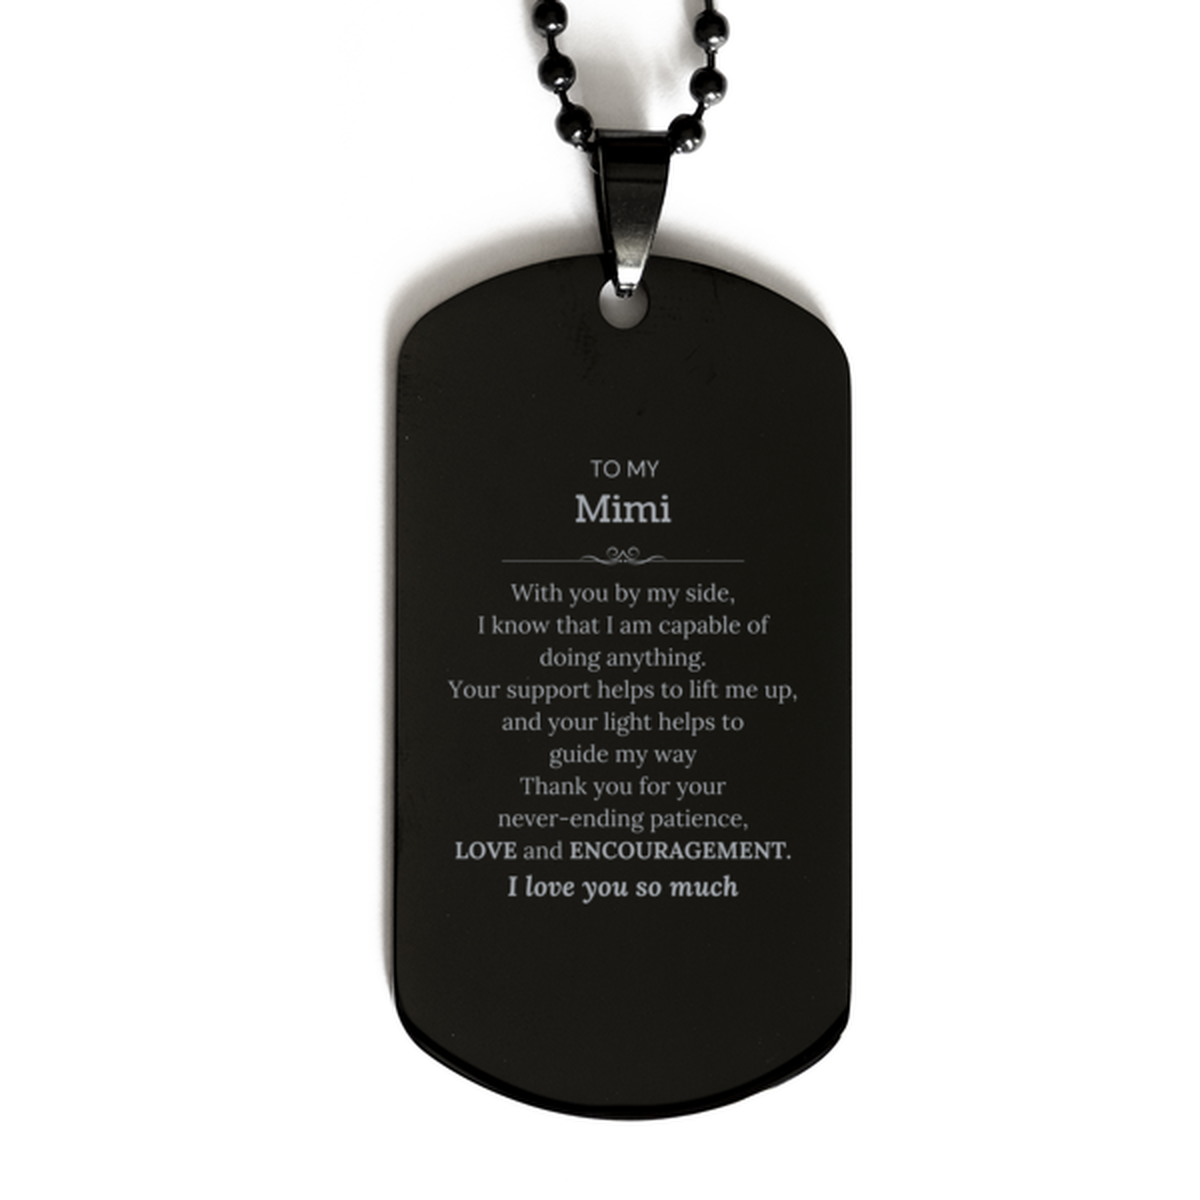 Appreciation Mimi Black Dog Tag Gifts, To My Mimi Birthday Christmas Wedding Keepsake Gifts for Mimi With you by my side, I know that I am capable of doing anything. I love you so much